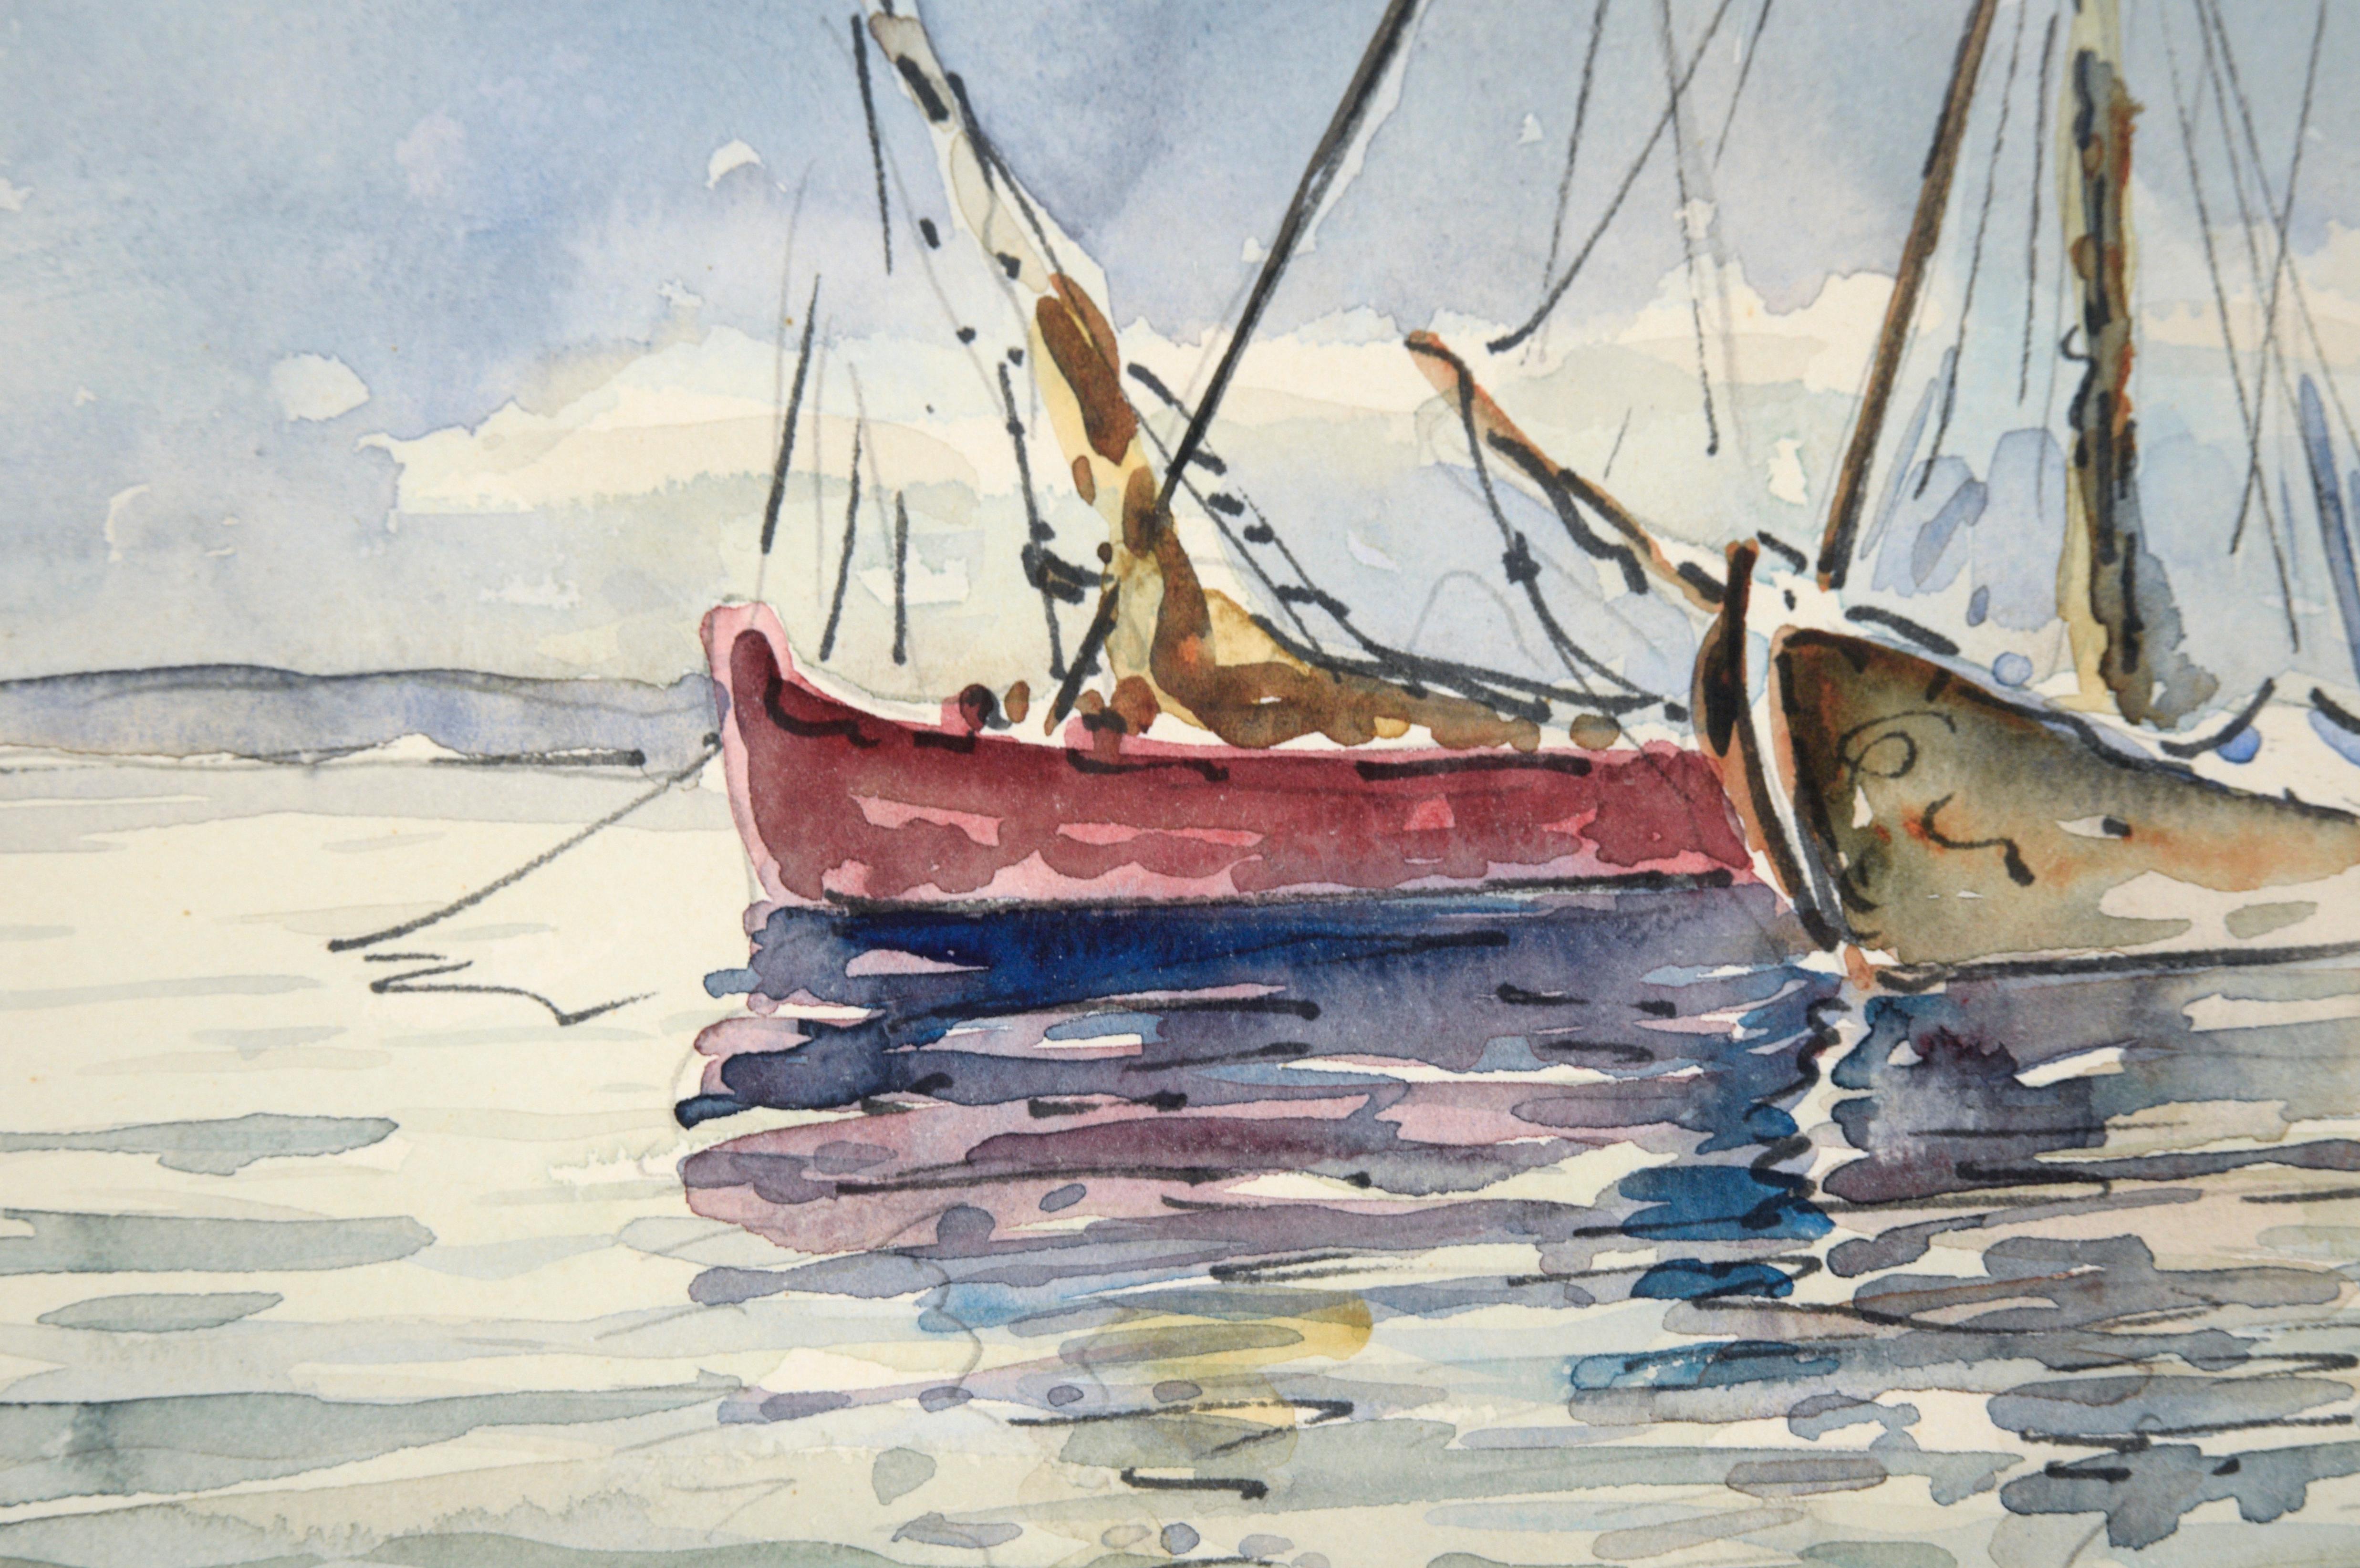 Two Anchored Sailboats - Nautical Seascape in Watercolor on Paper - Beige Landscape Art by Unknown